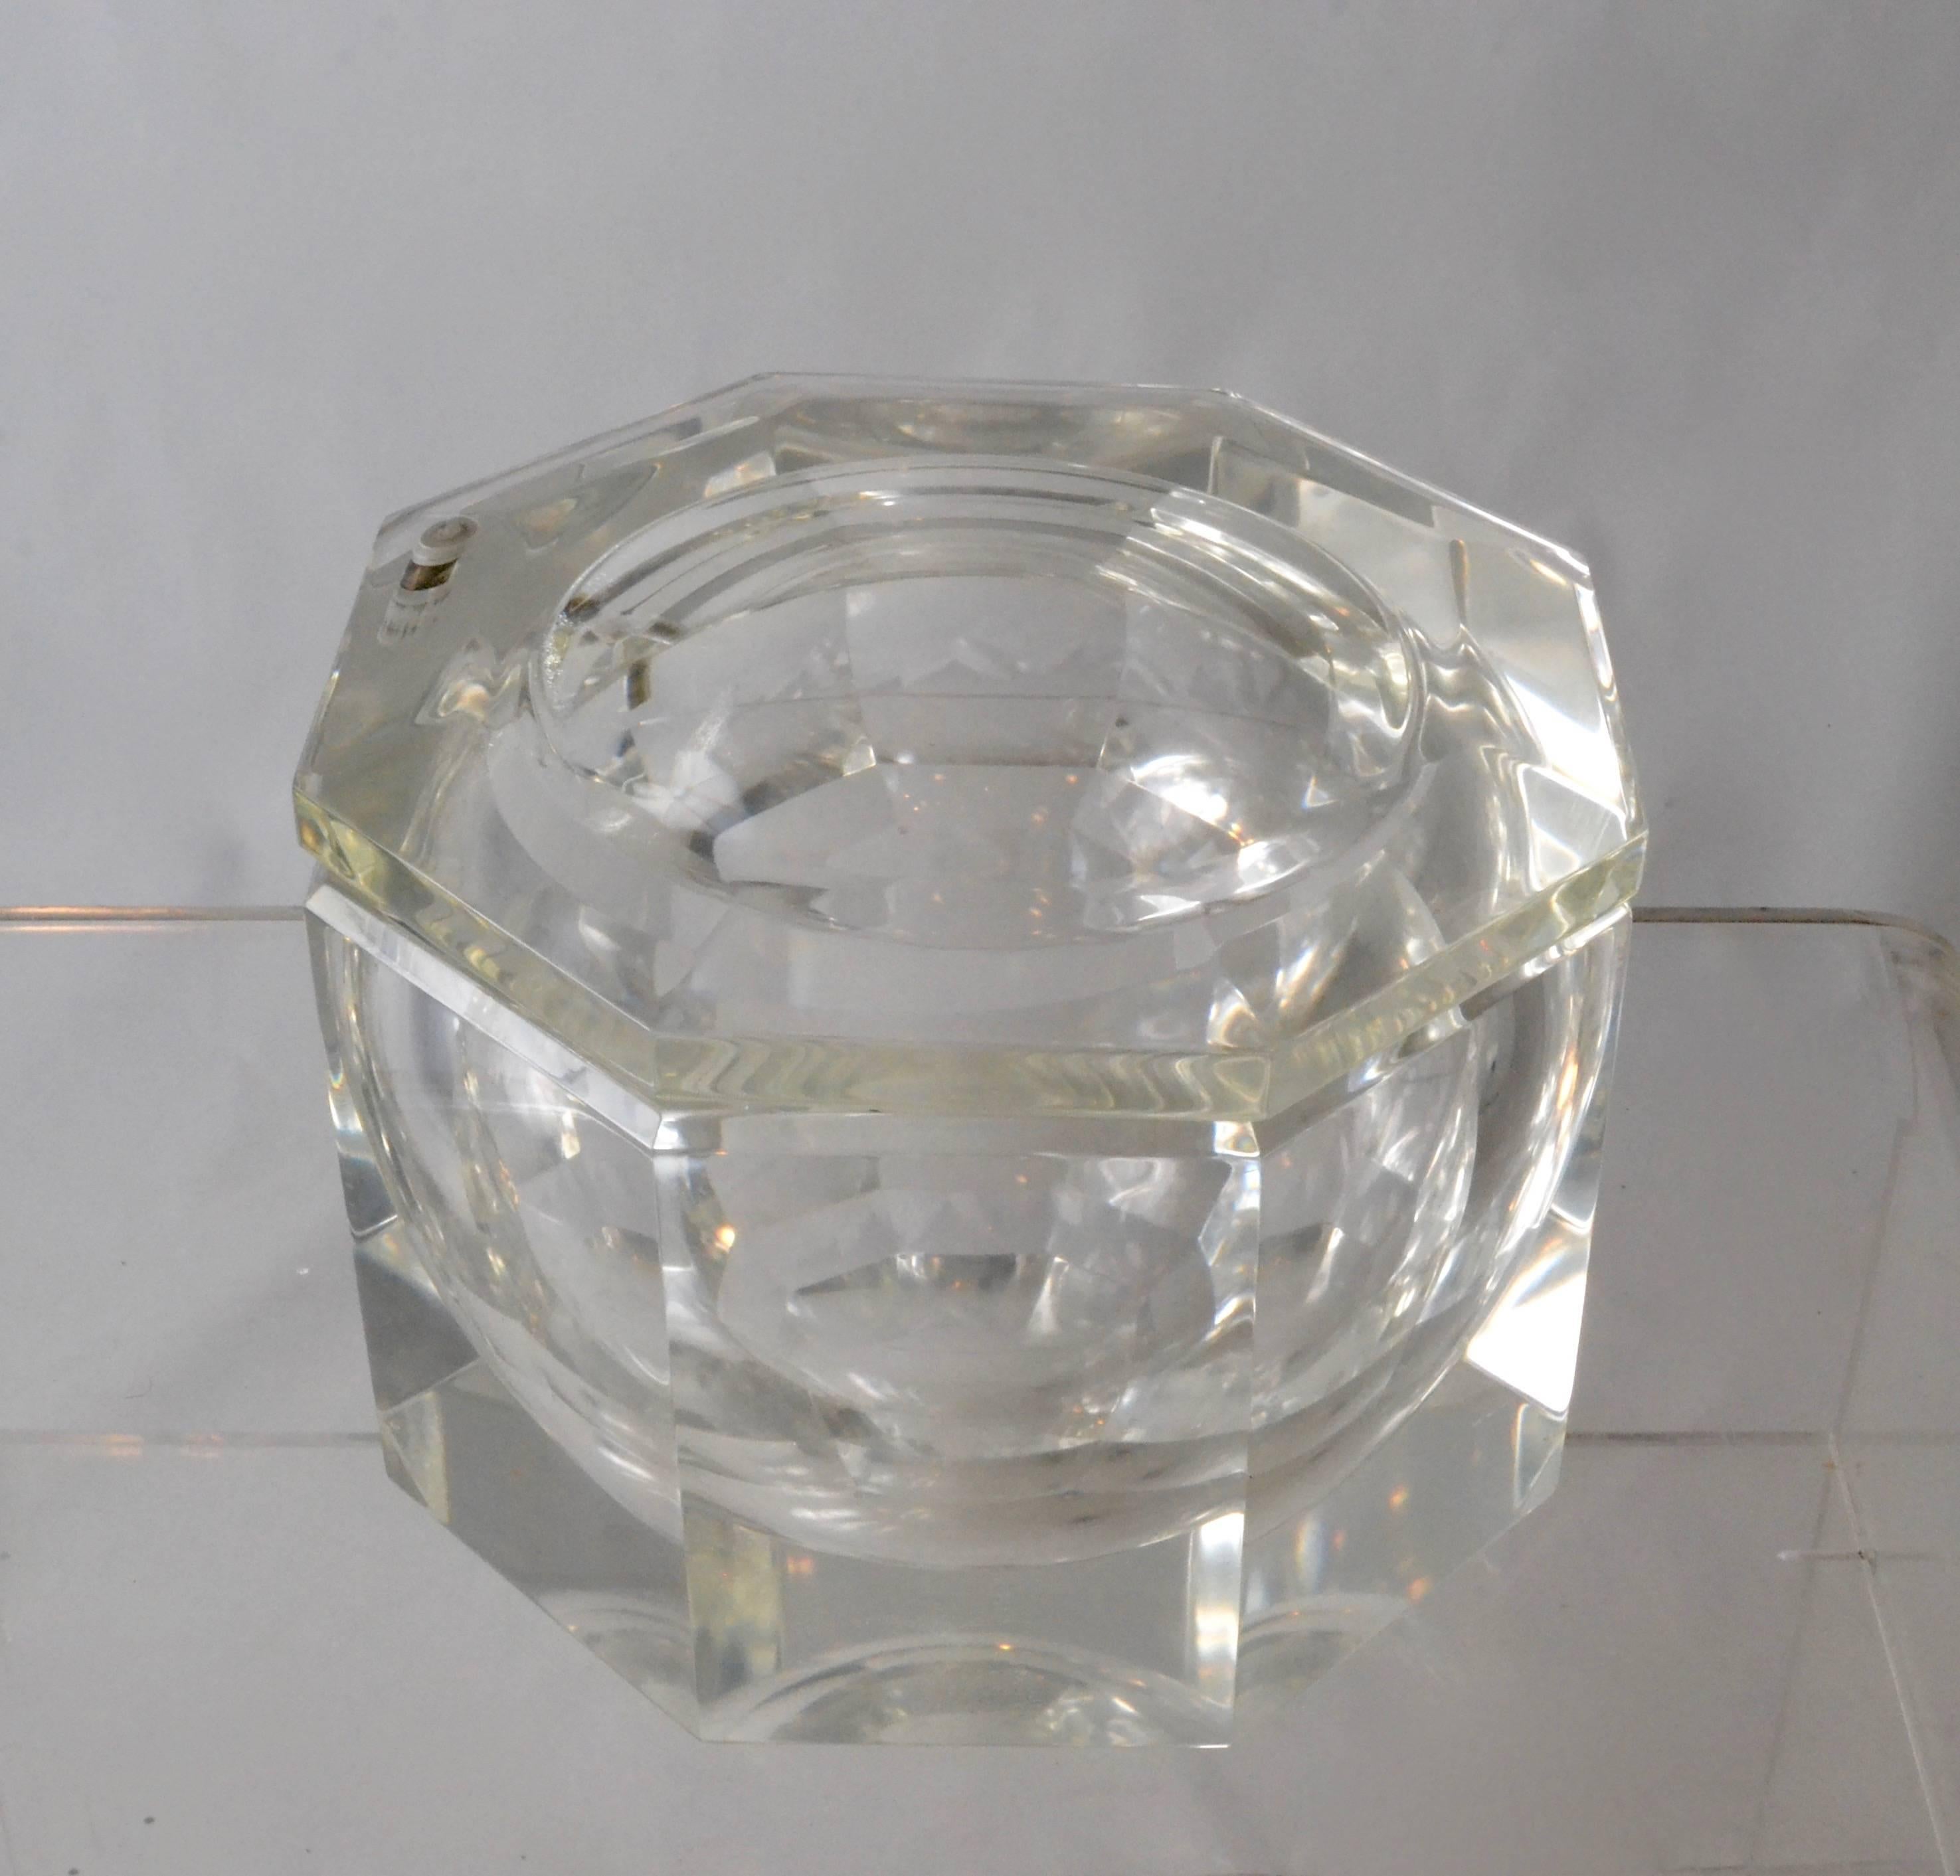 Classic heavy Lucite ice bucket/candy dish in larger size. Excellent condition.